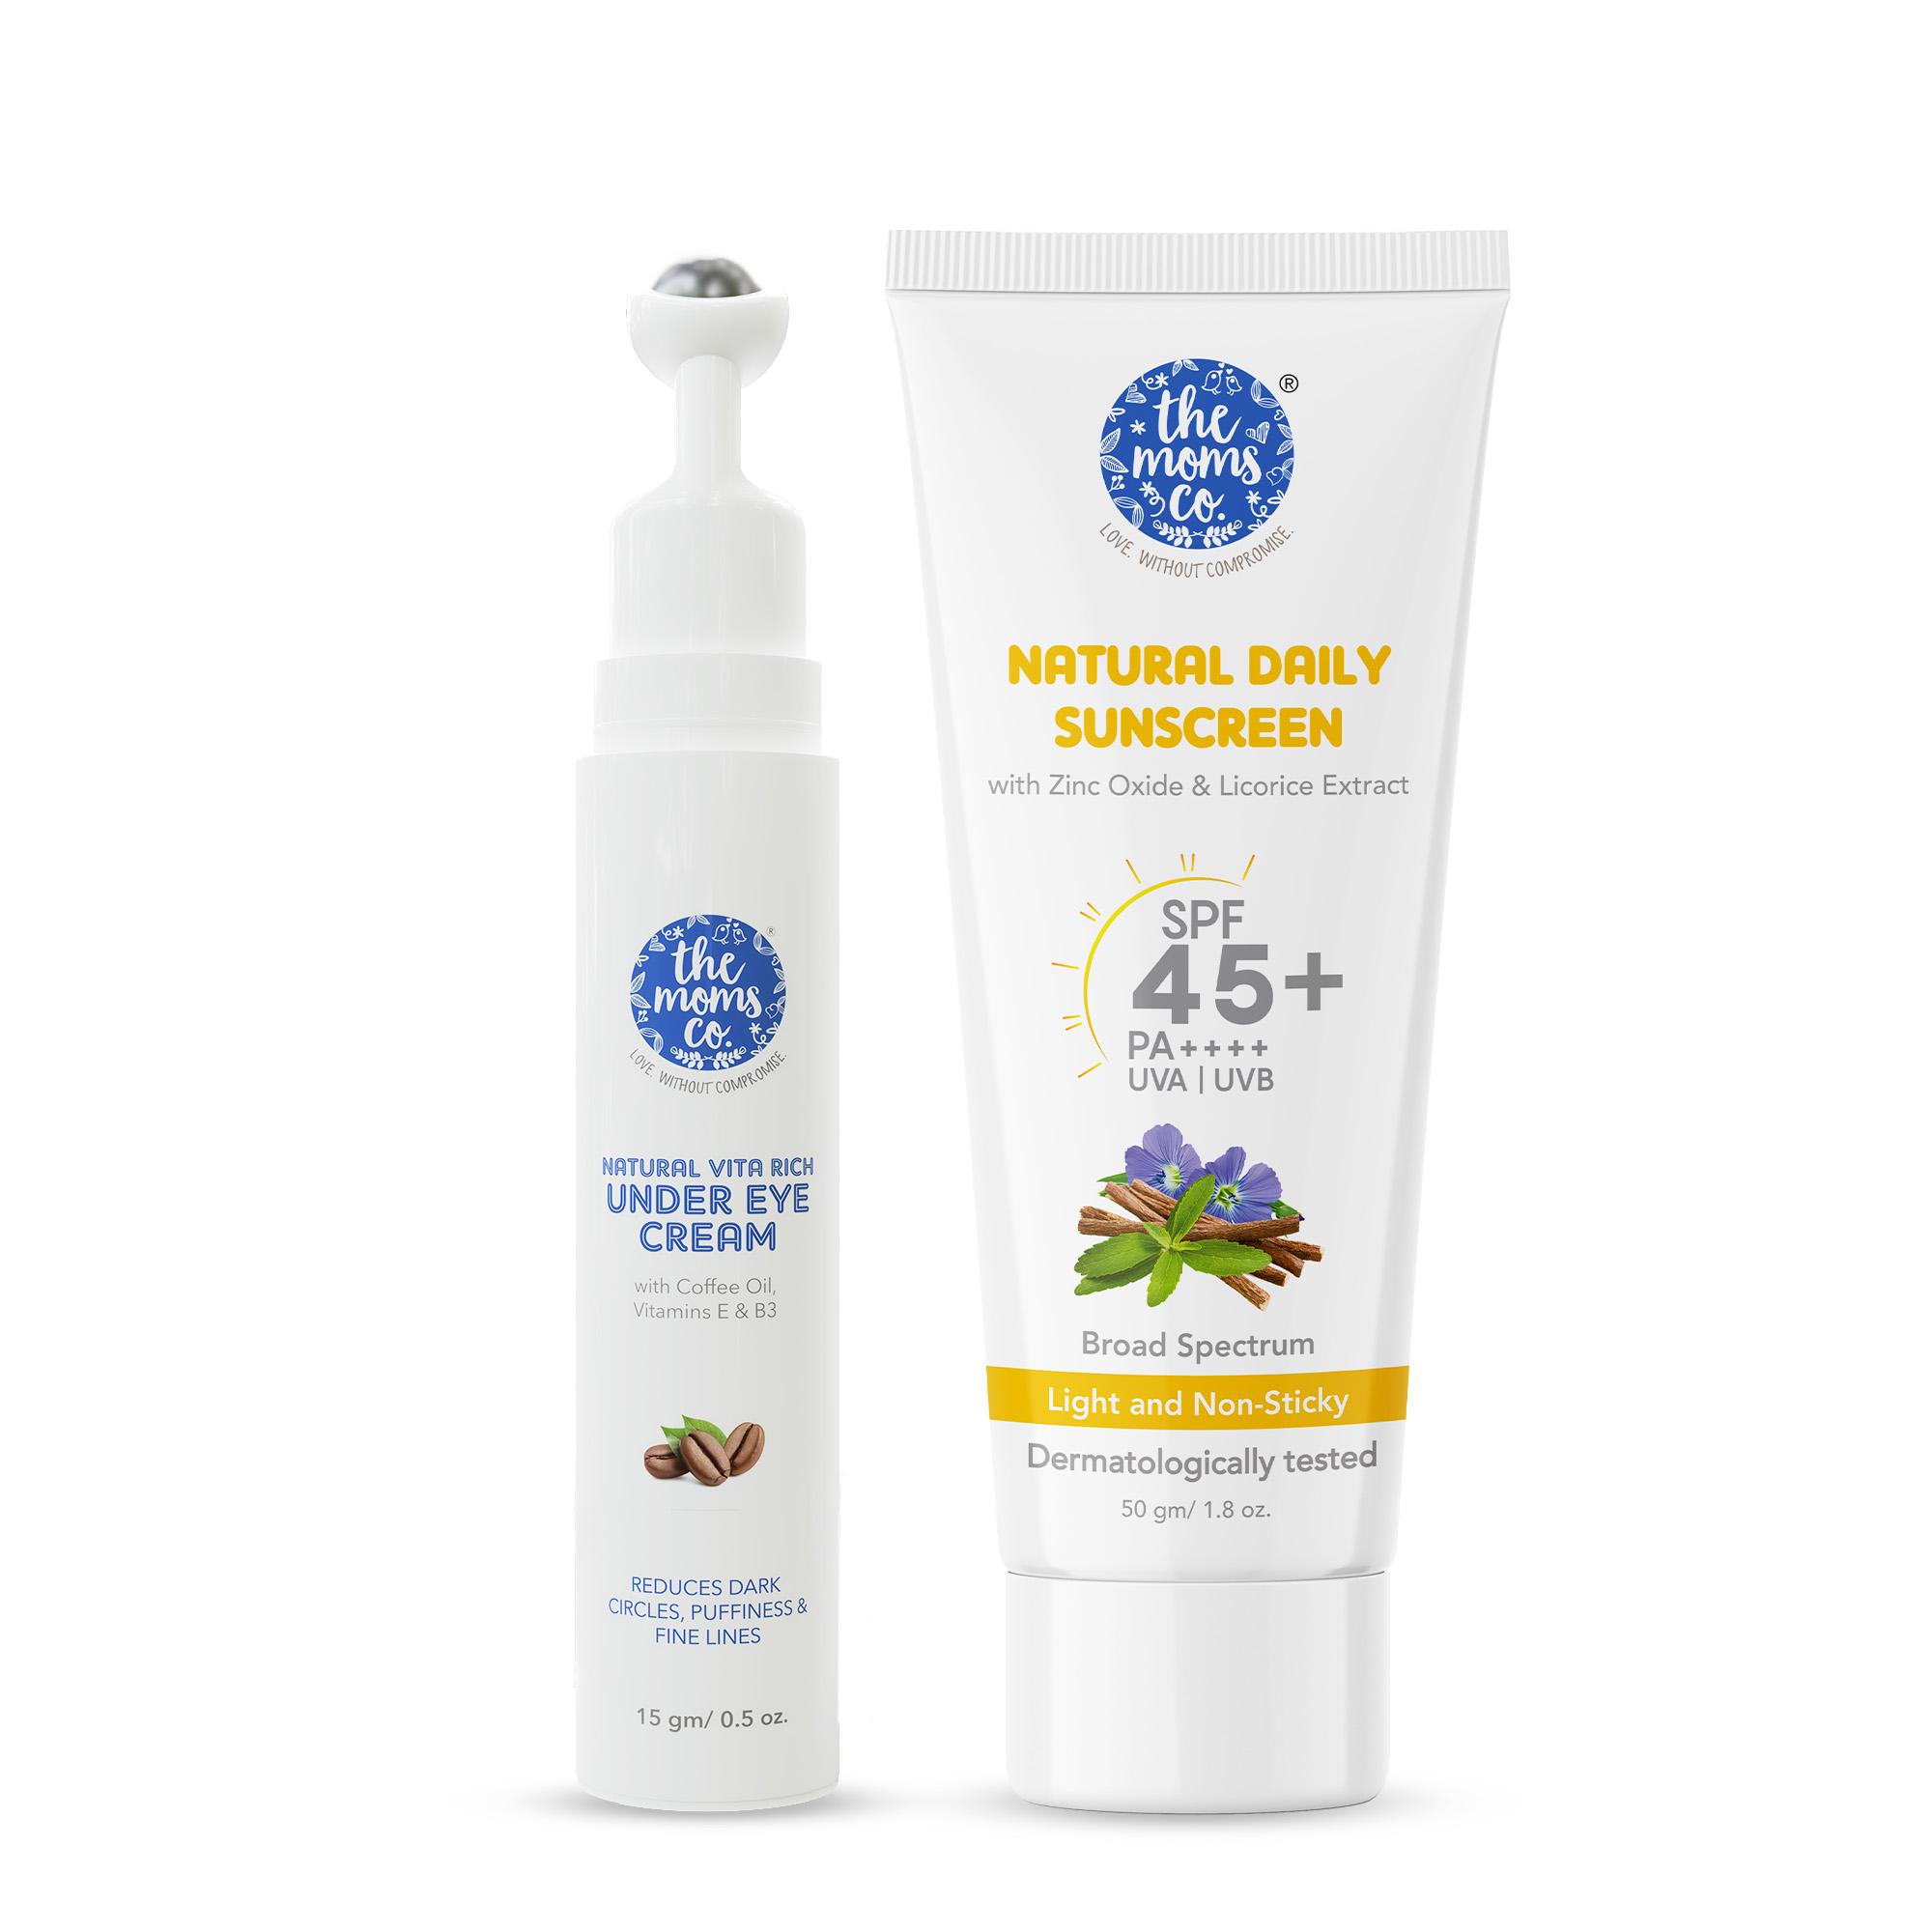 The Mom's Co. Vita Rich Under Eye Cream & Mineral Sunscreen With 25% Zinc Oxide Spf 45+ Pa++++ Combo